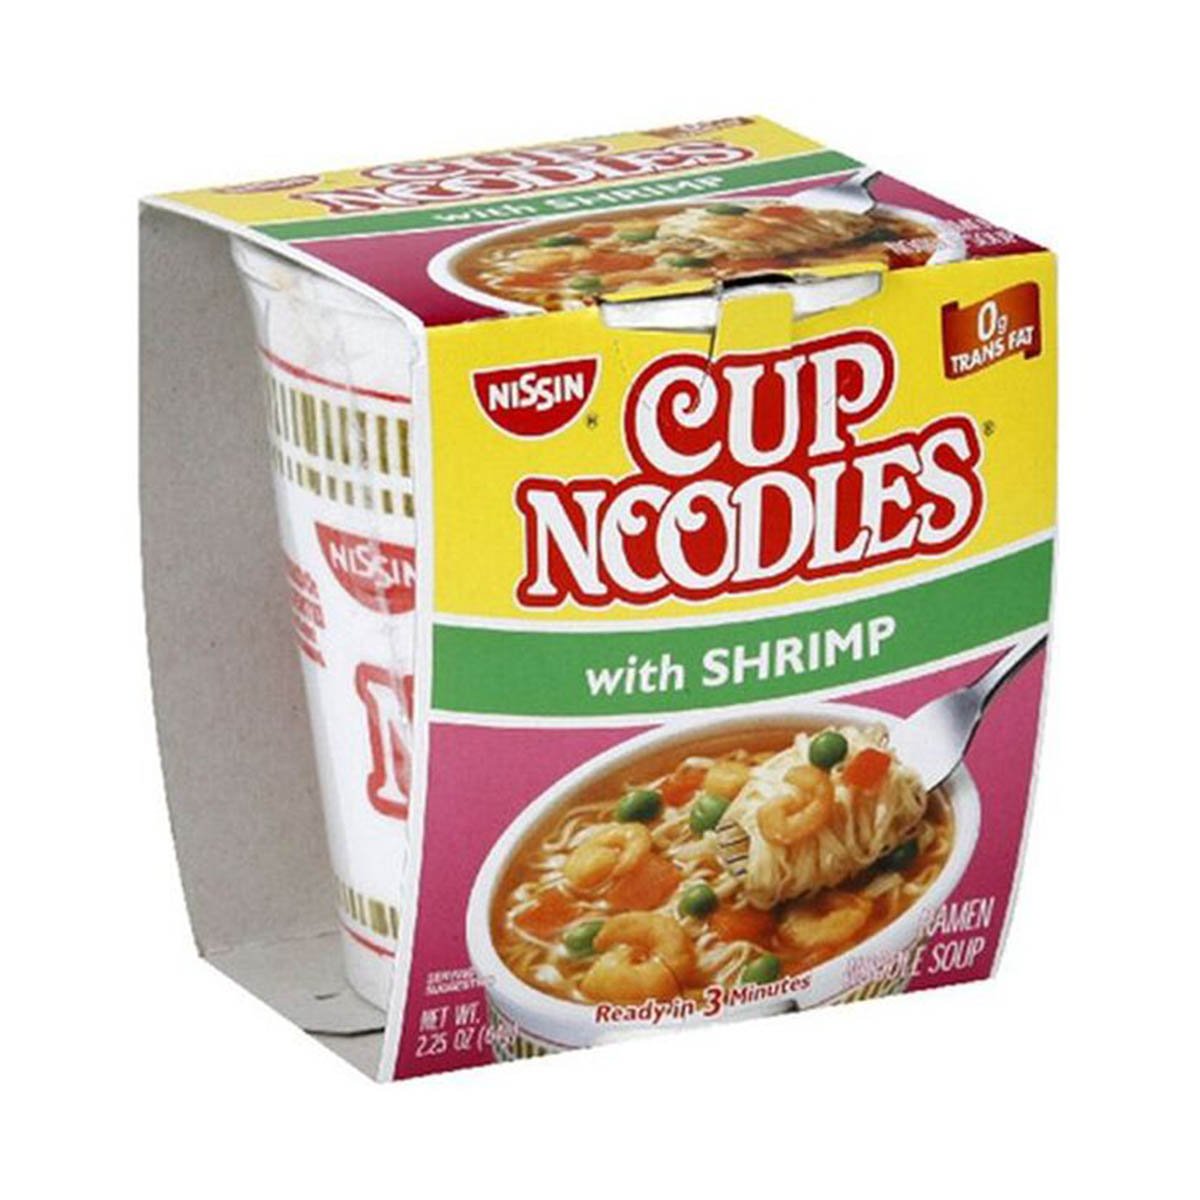 Nissin лапша. Nissin Cup Noodles. Nissin foods лапша. Nissin Cup Noodles с креветками. Лапша Cup Noodles курица спайси Чили.